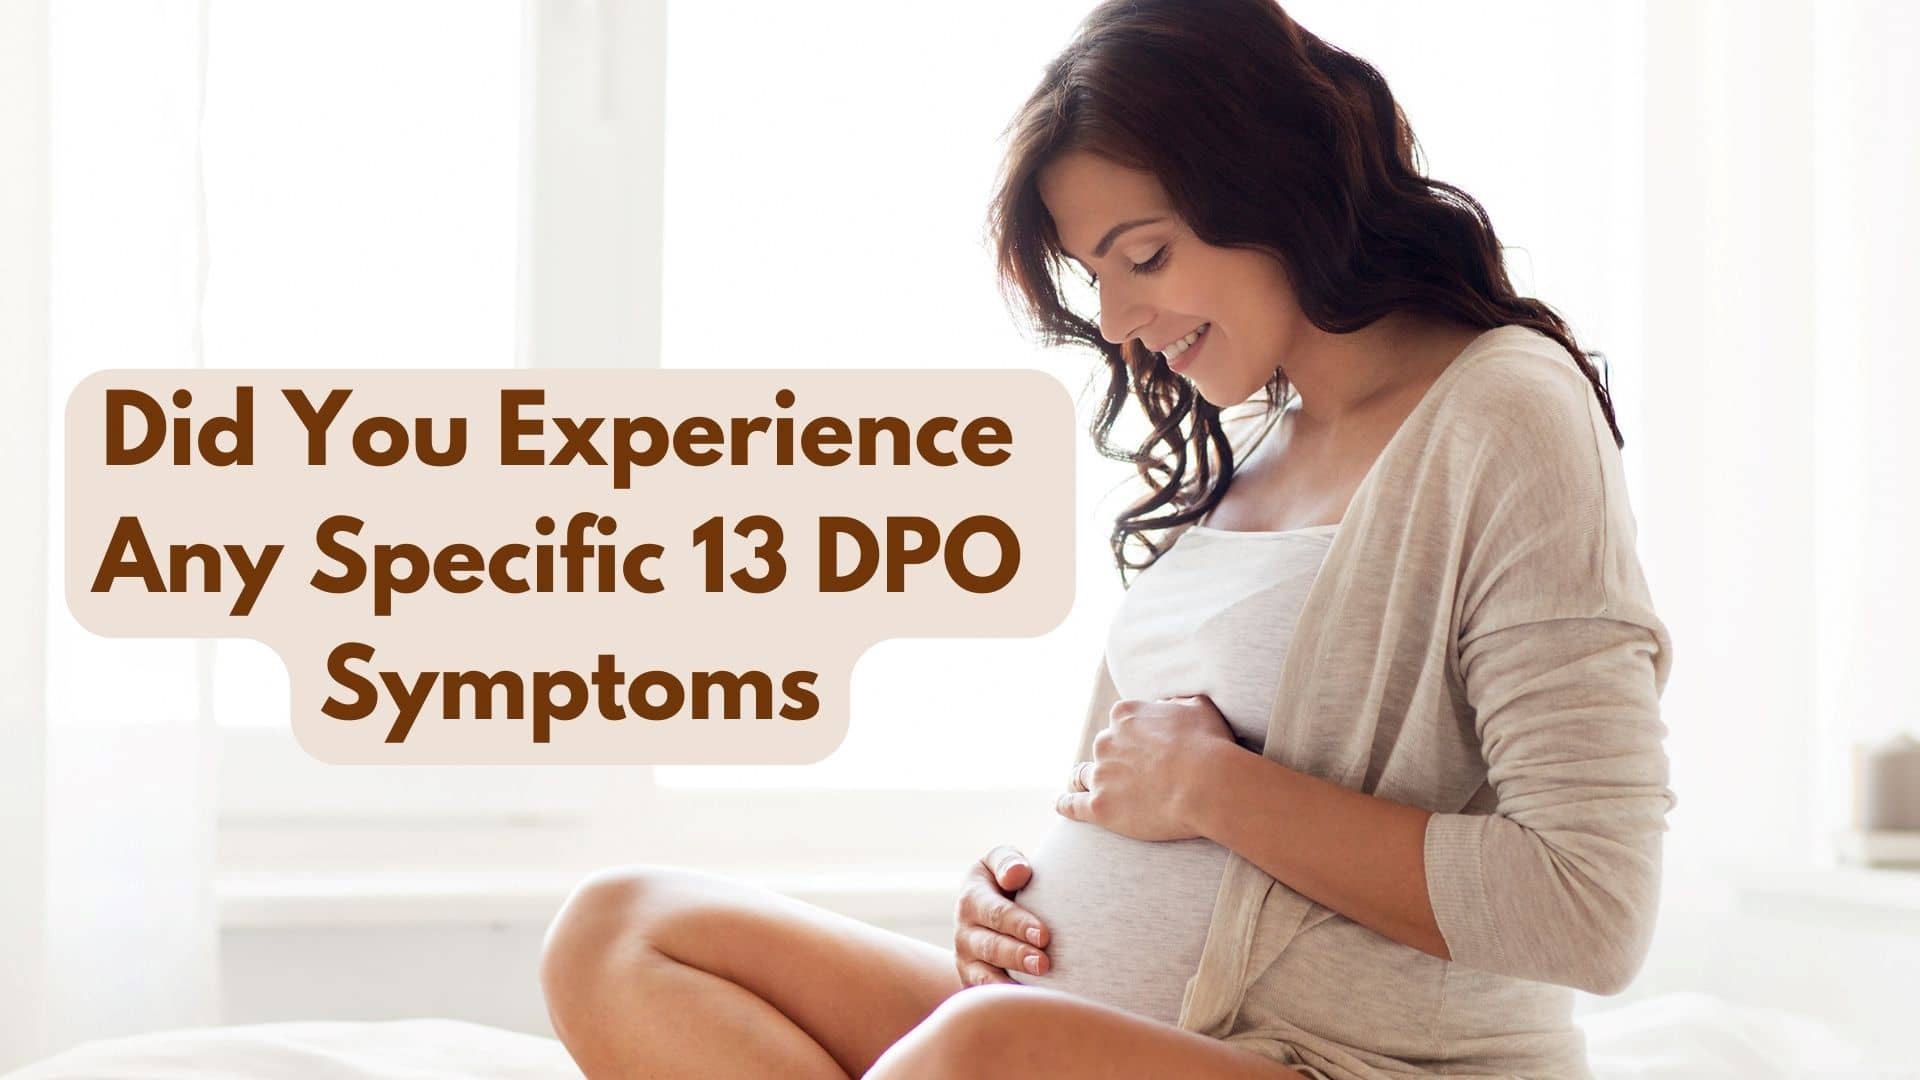 Did You Experience Any Specific 13 DPO Symptoms?